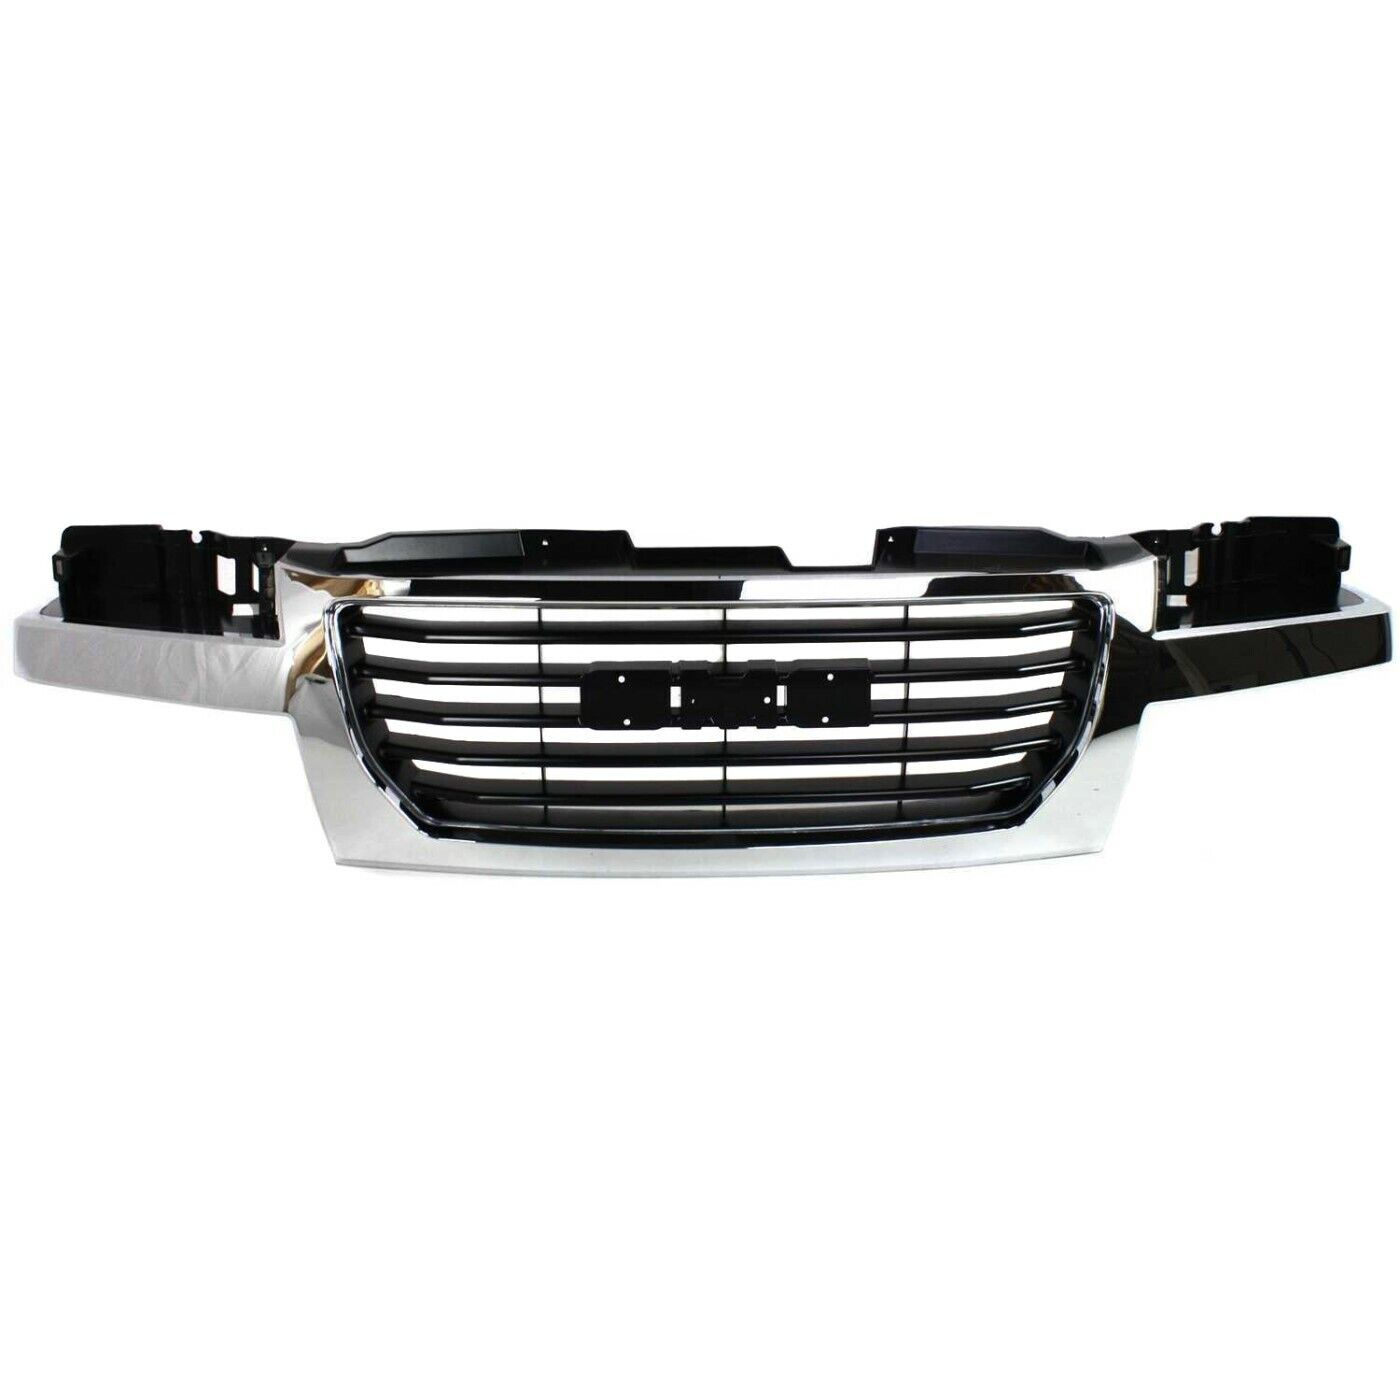 Grille For 2004-2012 GMC Canyon Chrome Shell w/ Black Insert Plastic